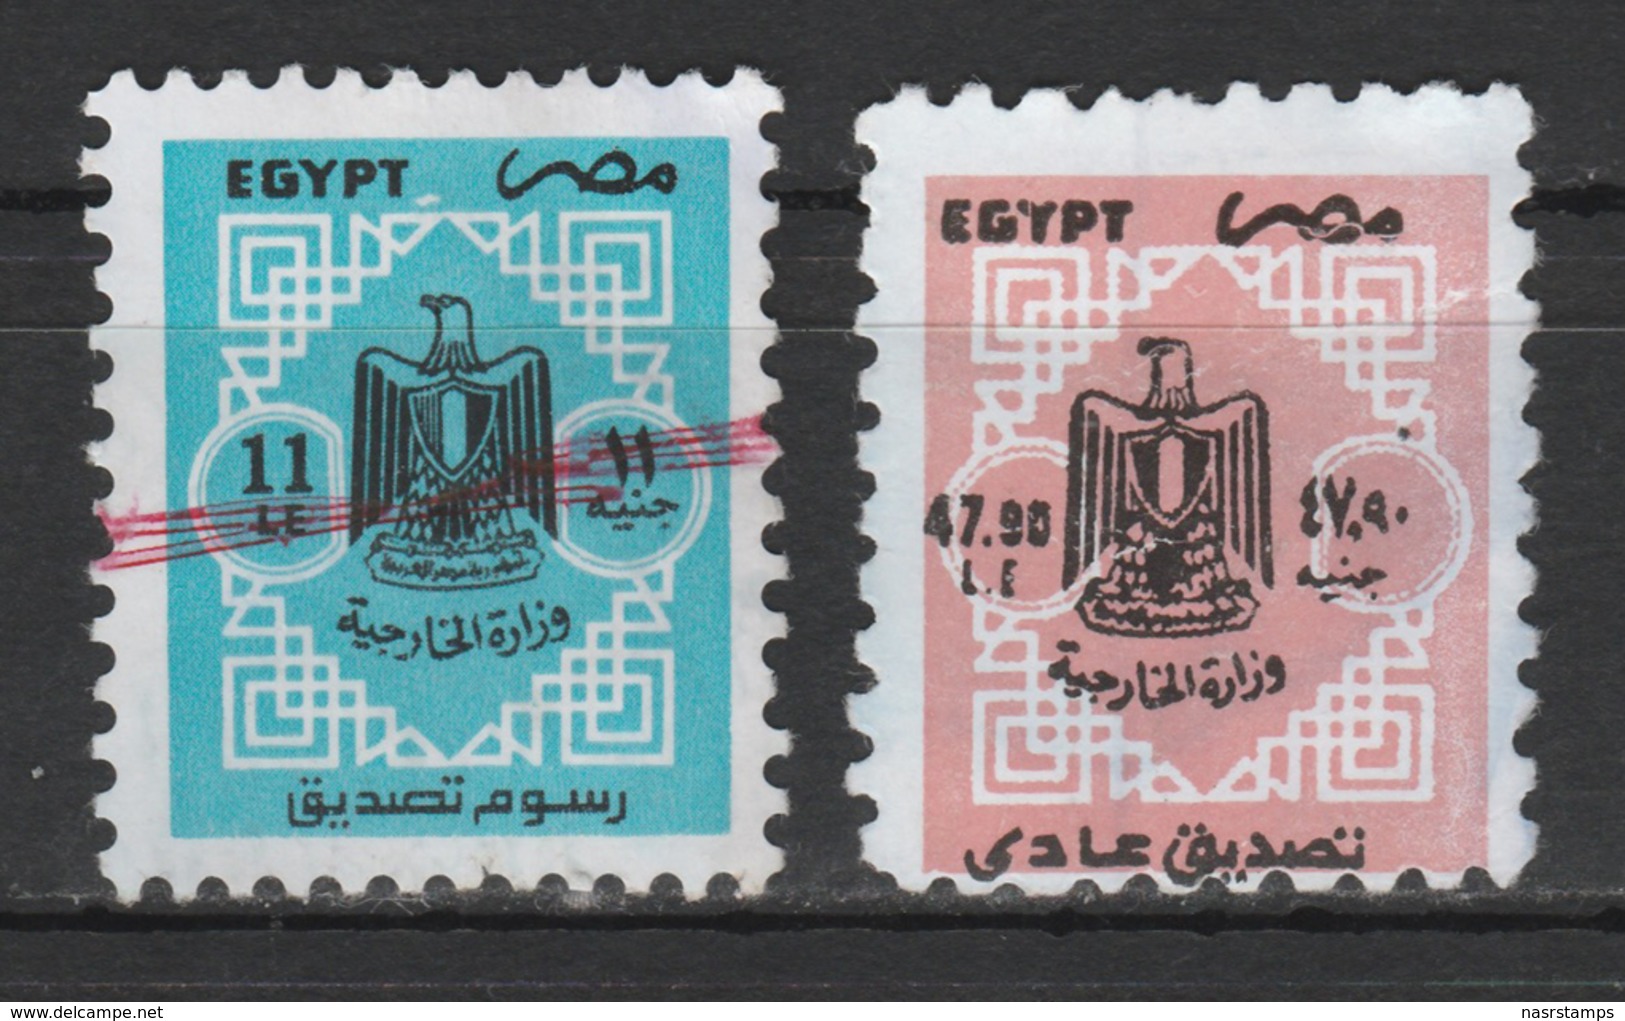 Egypt - Rare - ( Old Revenue - Ministry Of Foreign Affairs - 11 & 47.90 EGP ) Used - Oblitérés